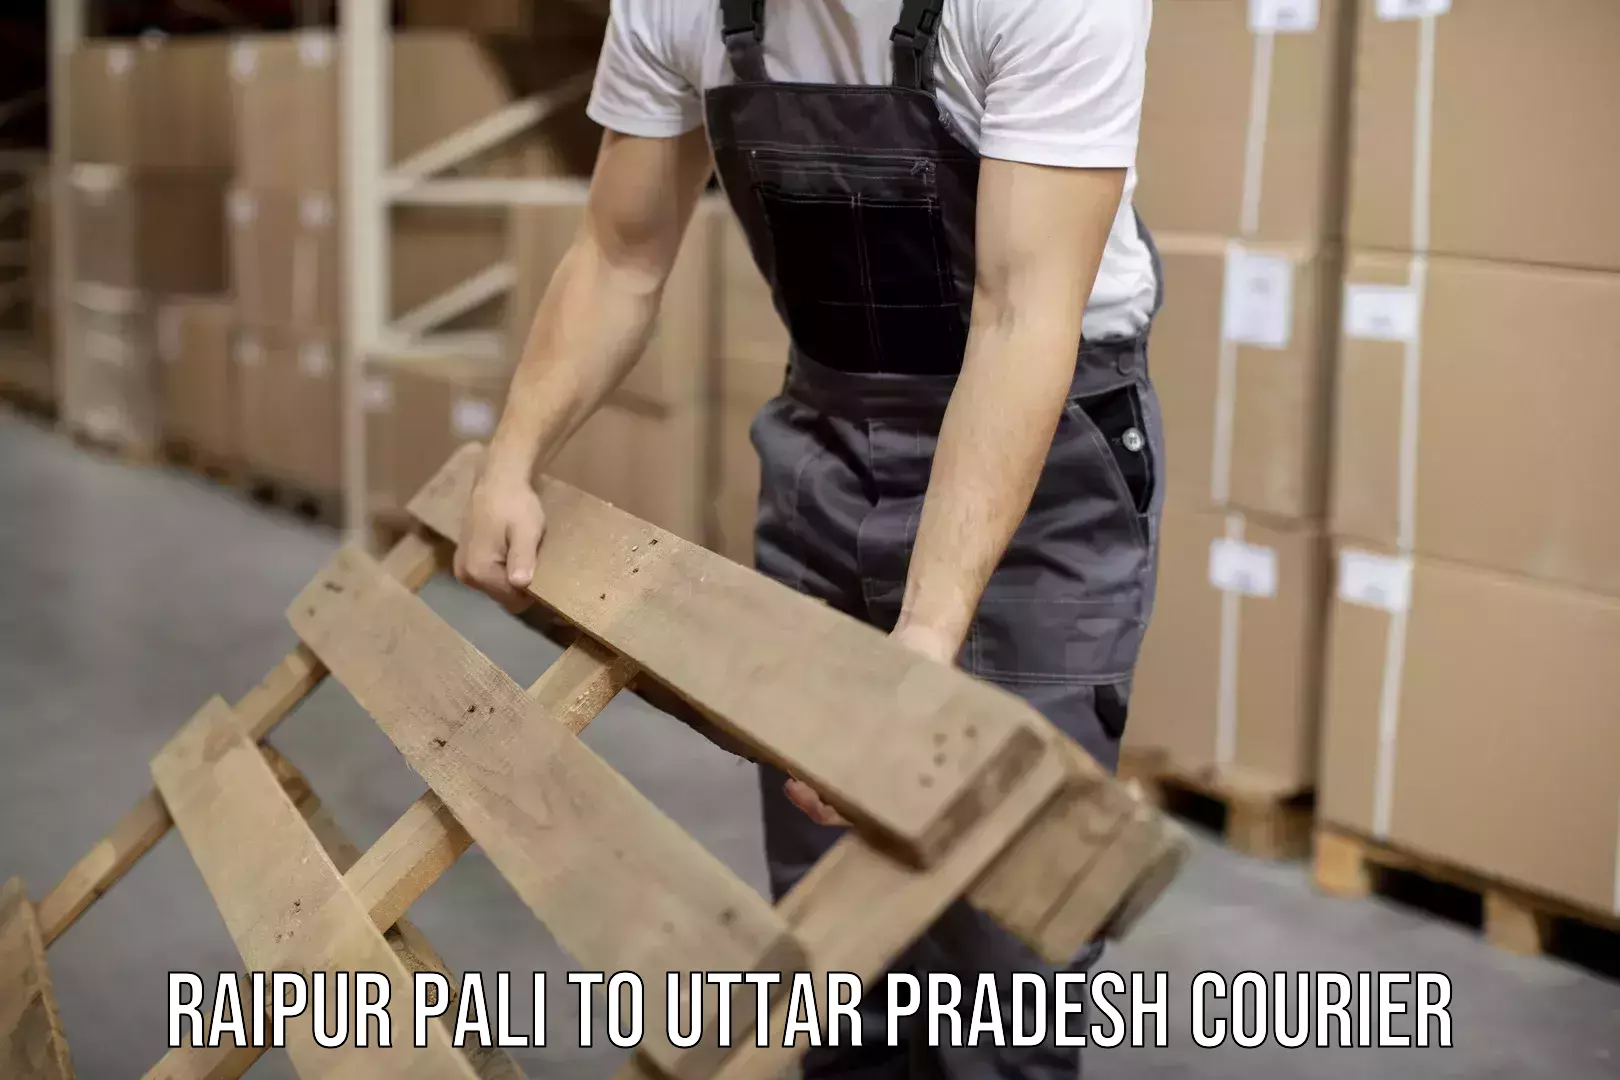 Professional courier handling Raipur Pali to Baghpat